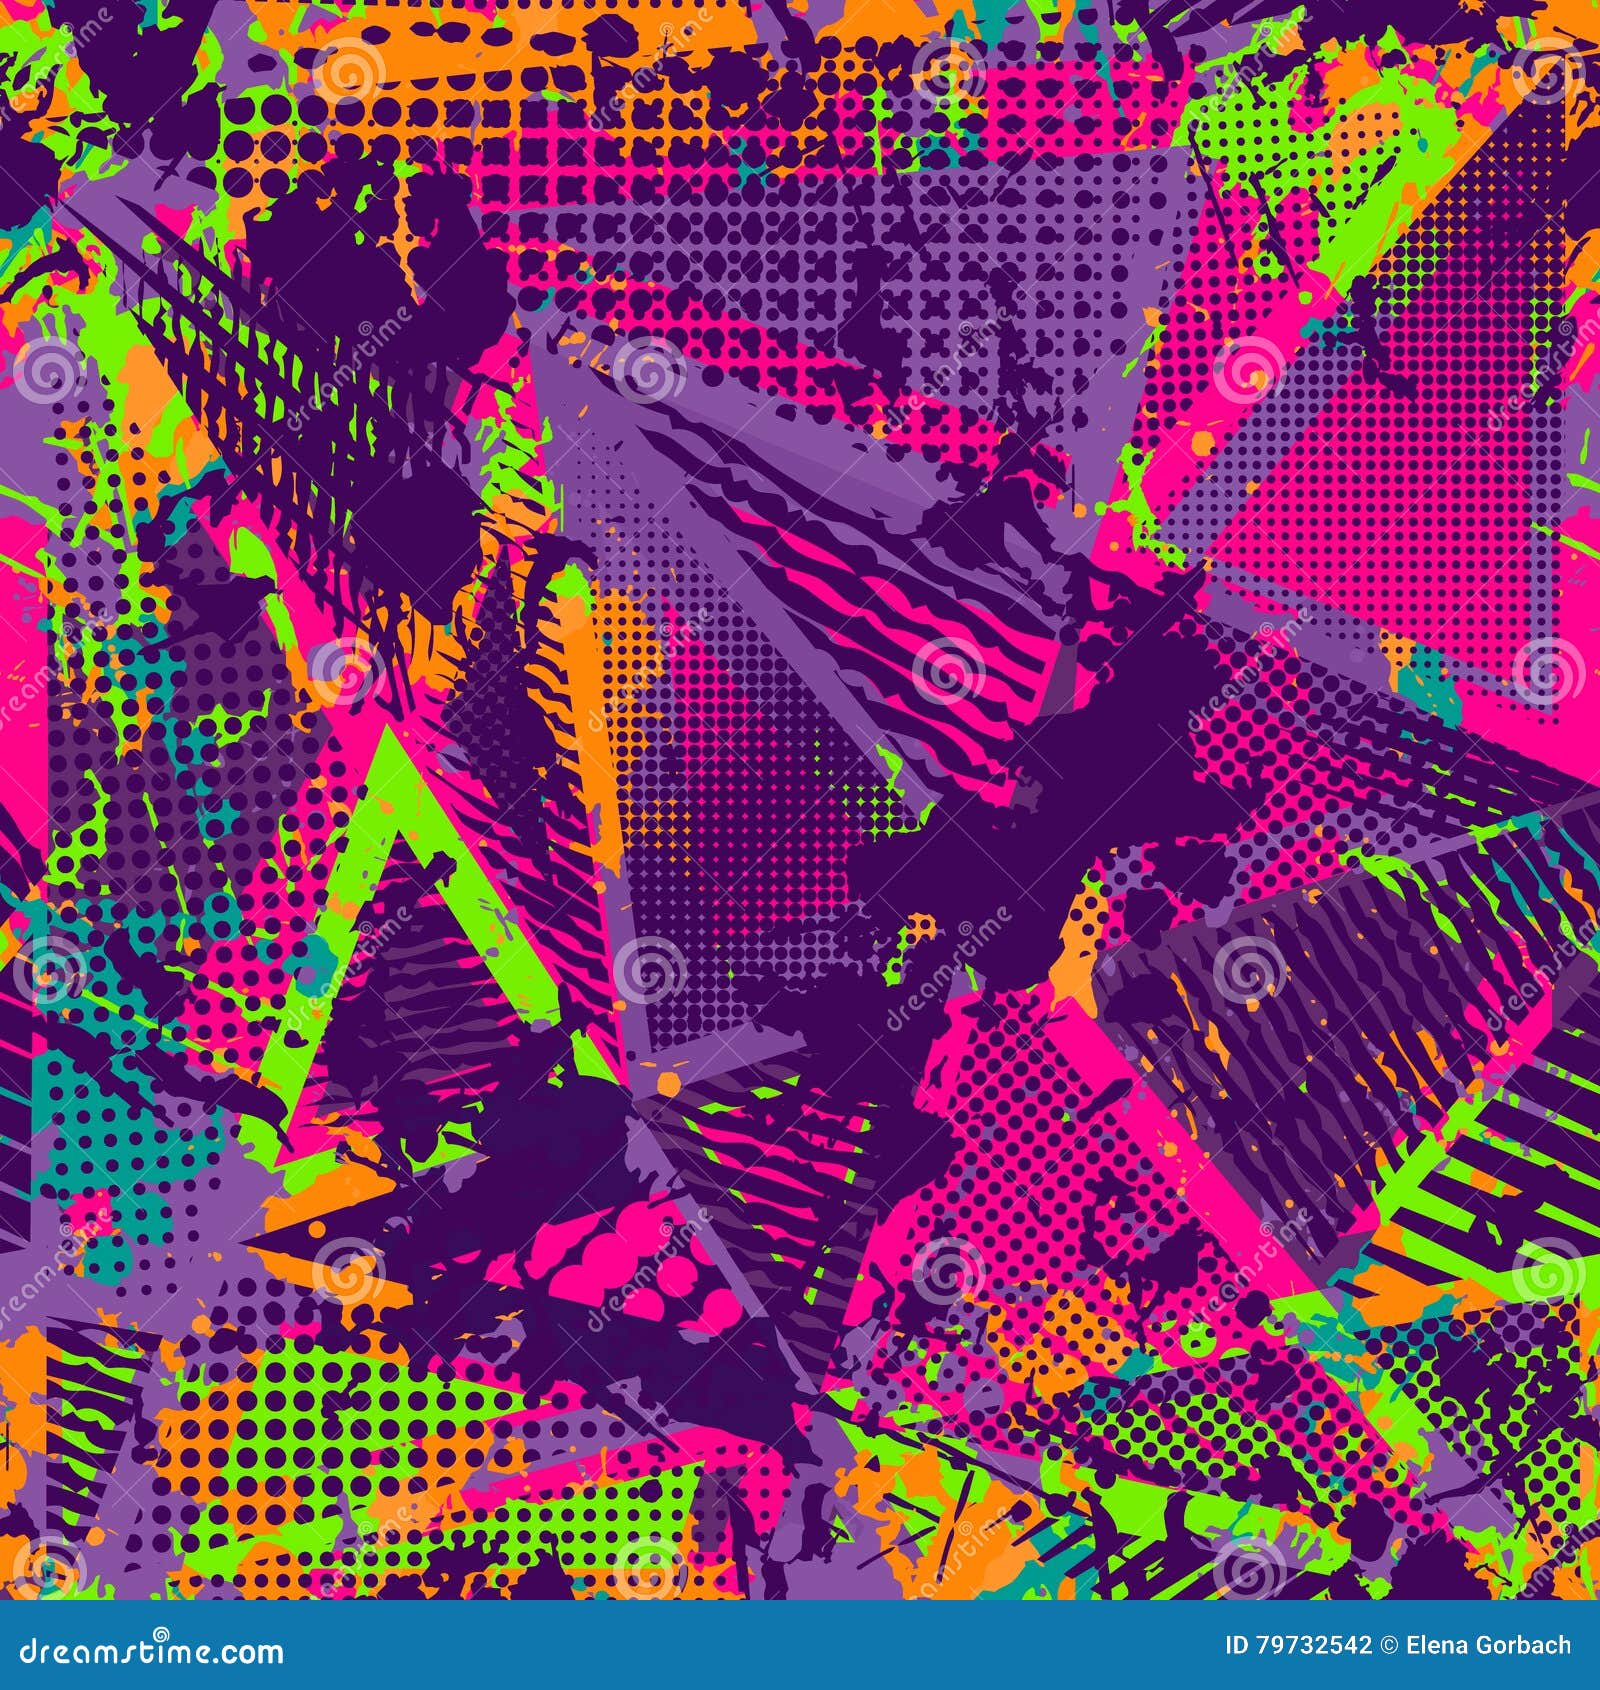 abstract urban seamless pattern. grunge texture background. scuffed drop sprays, triangles, dots, neon spray paint